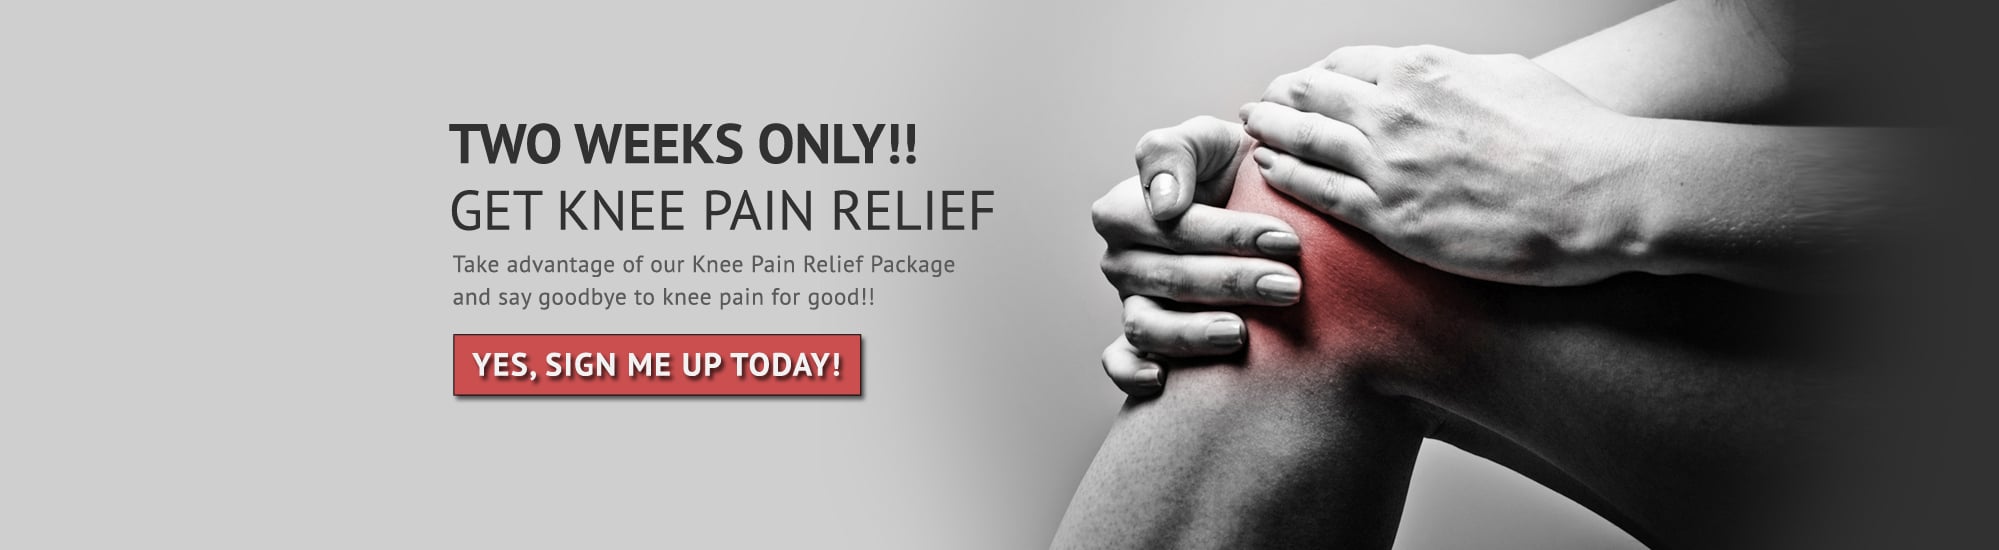 knee pain relief landing page slider